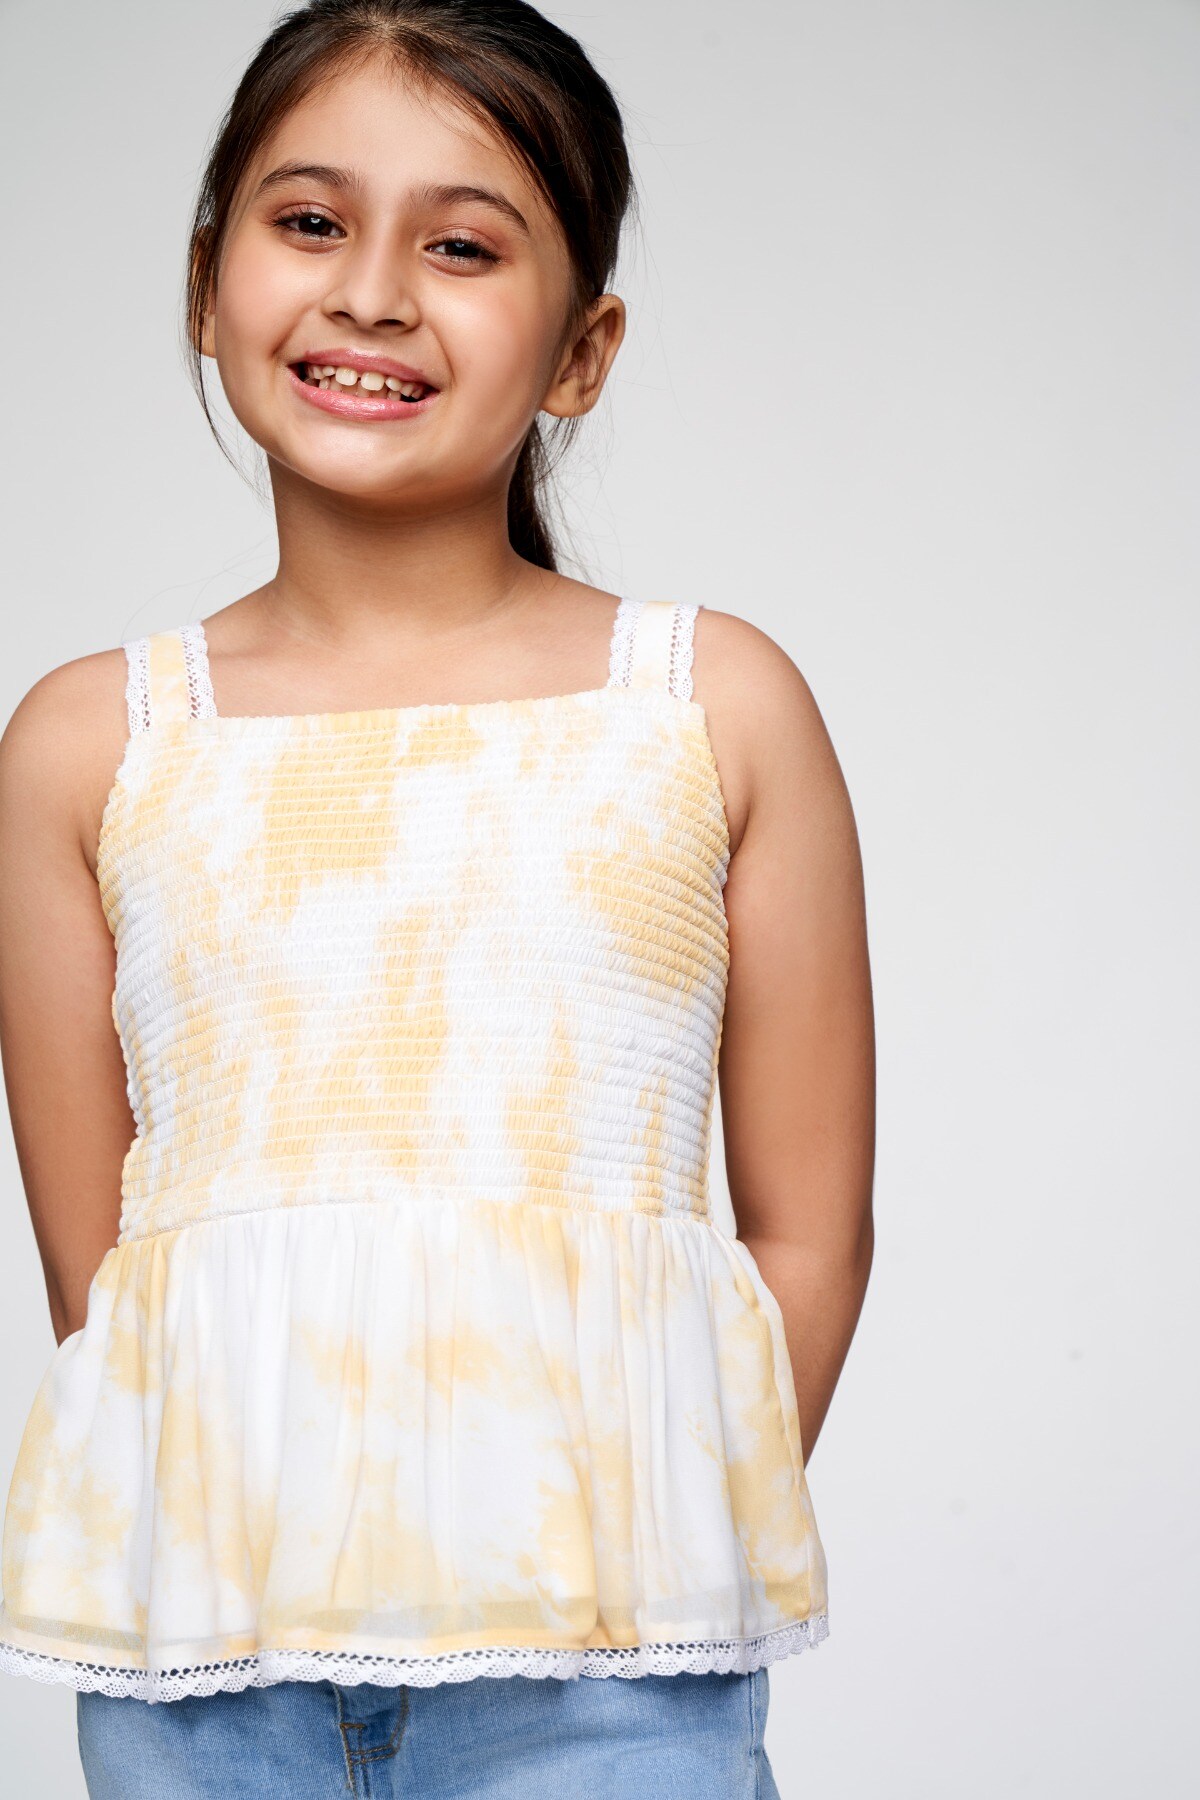 1 - Yellow Smocked Fit and Flare Top, image 1